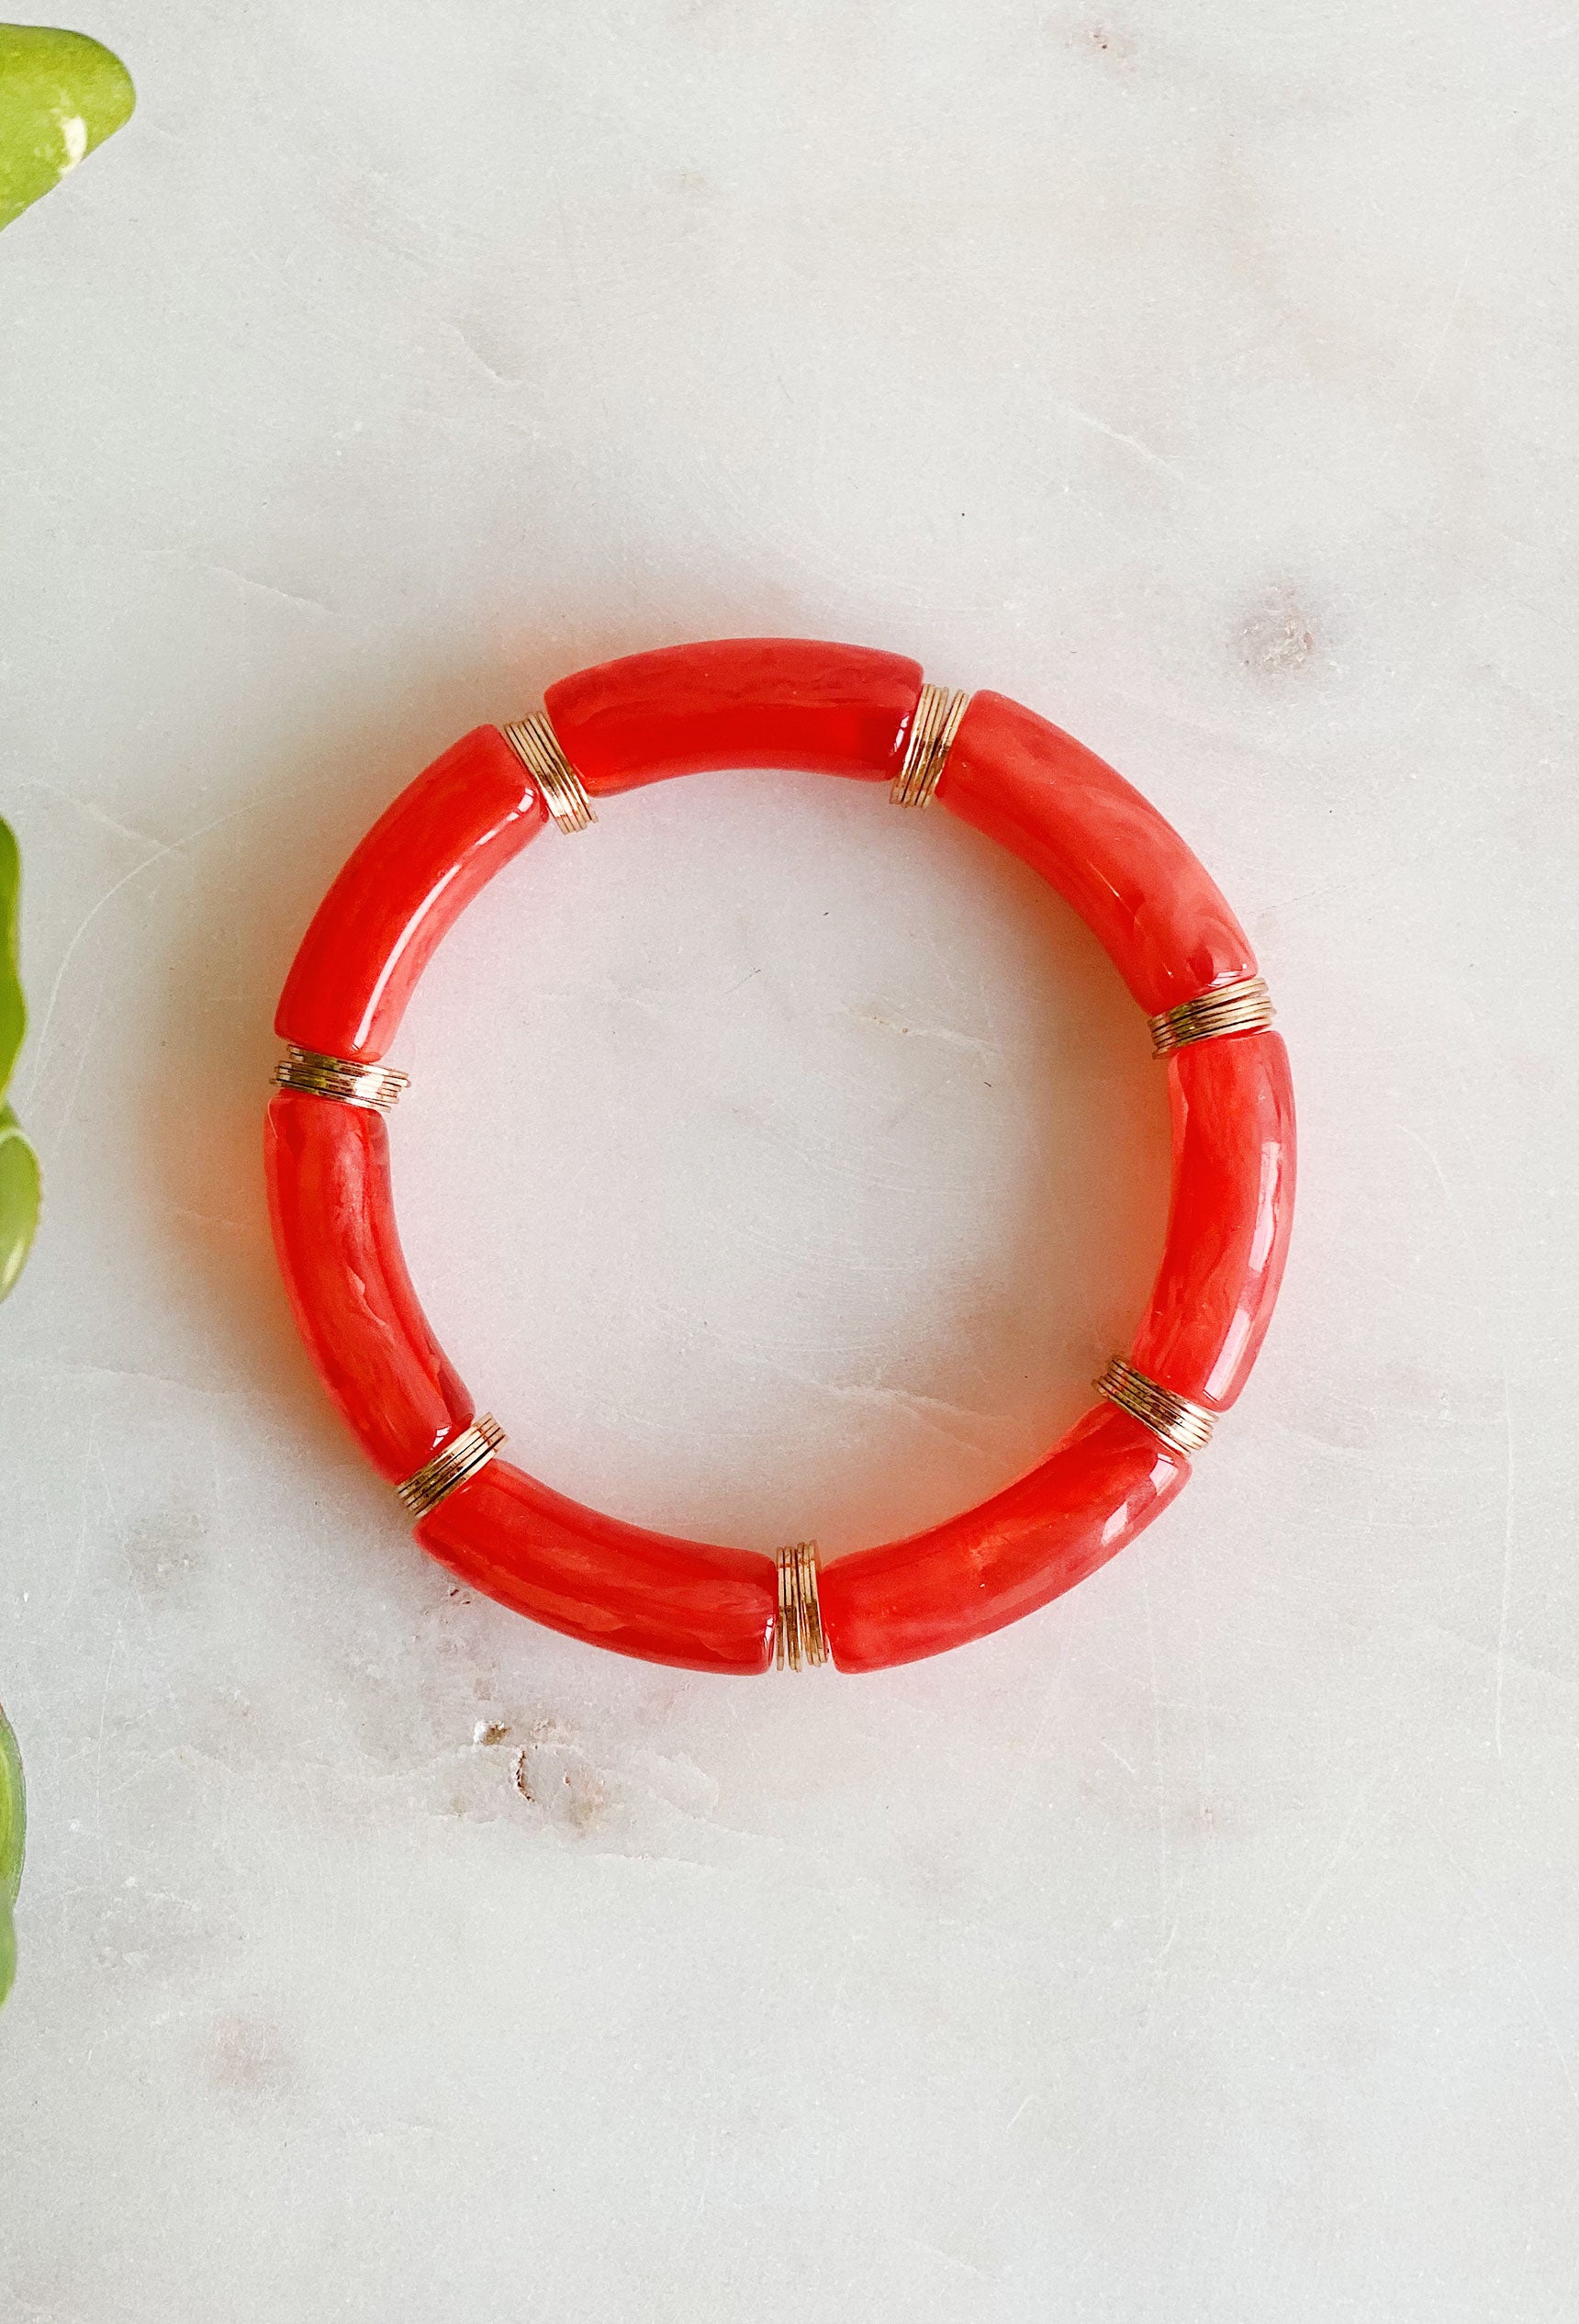 Mollie Acrylic Bracelet in Coral. gold and orange beads